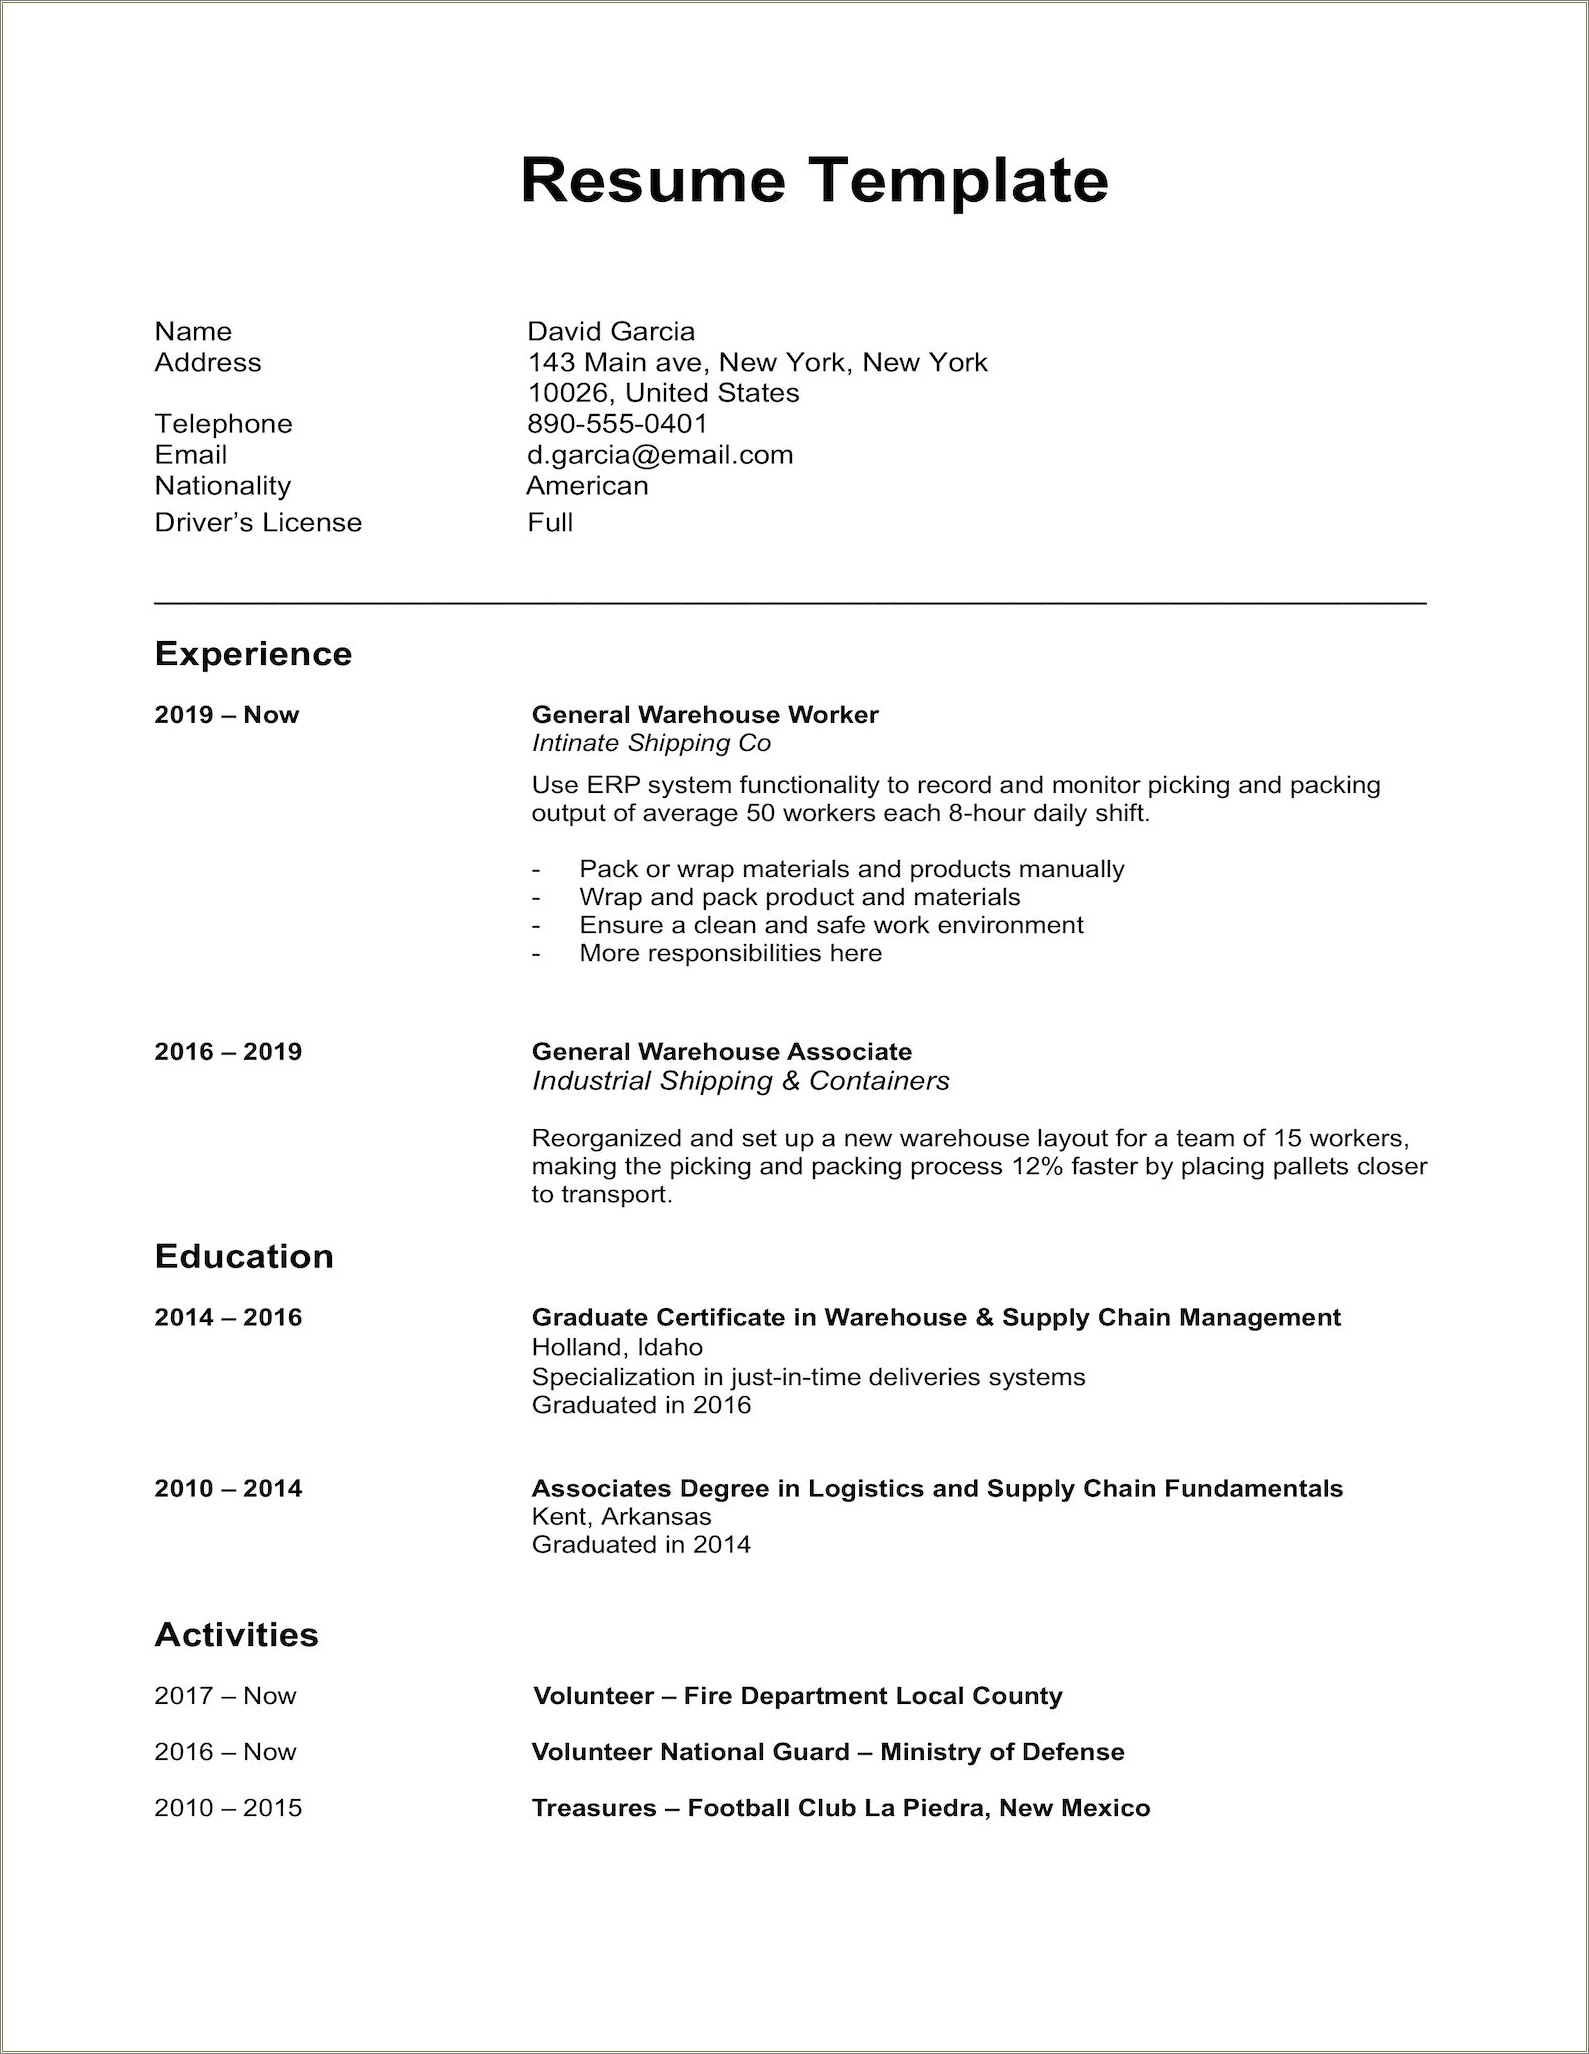 Share Free Professional Simple Resume Word